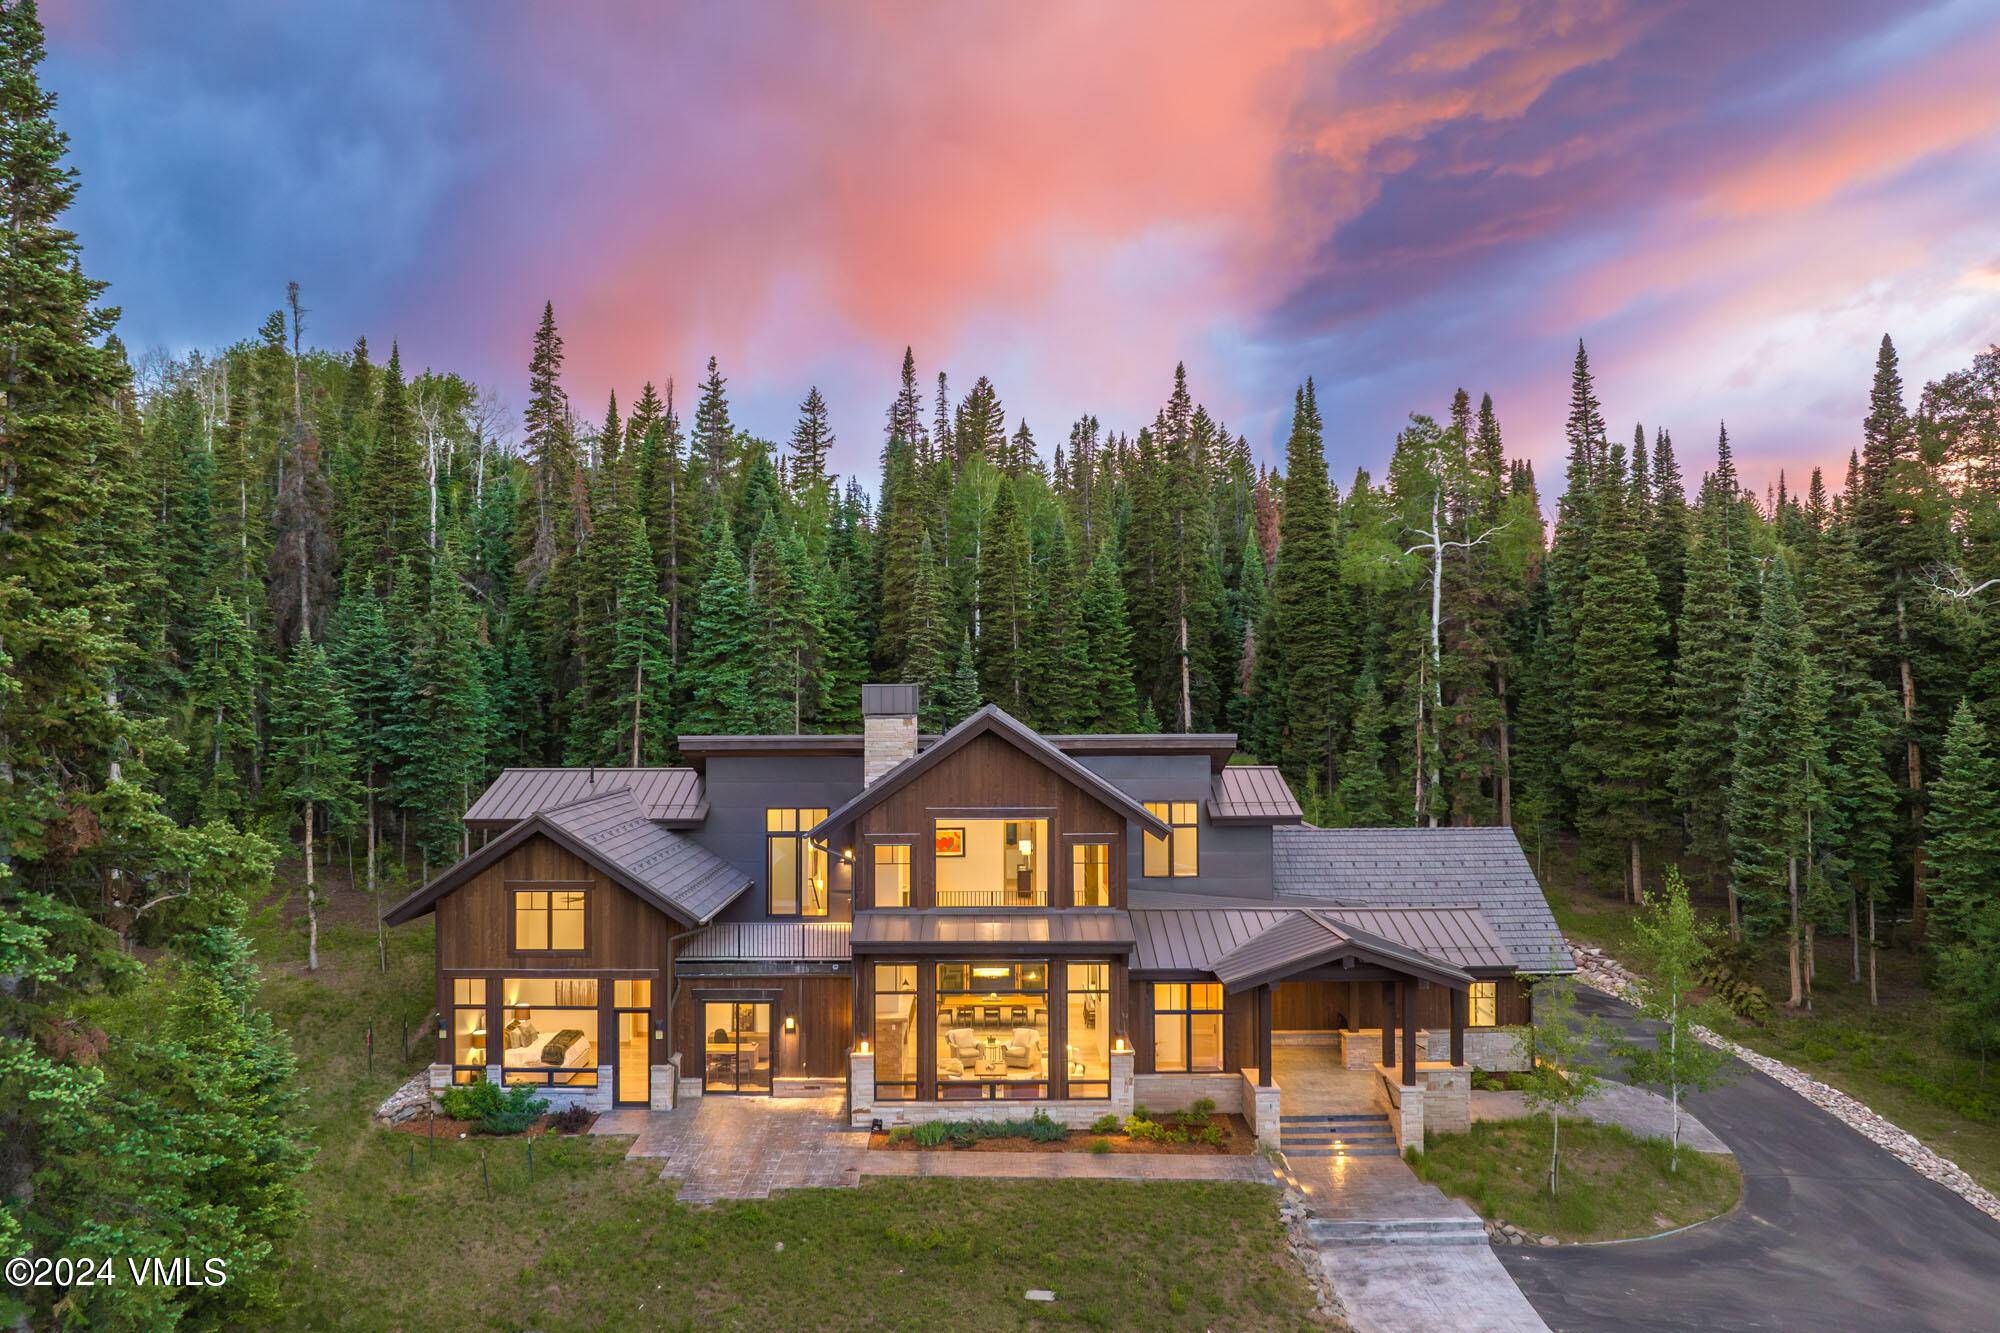 Experience the pinnacle of the Cordillera lifestyle mountain contemporary residence, completed in 2019, epitomizing luxury and tranquility on over 2 flat, usable acres.